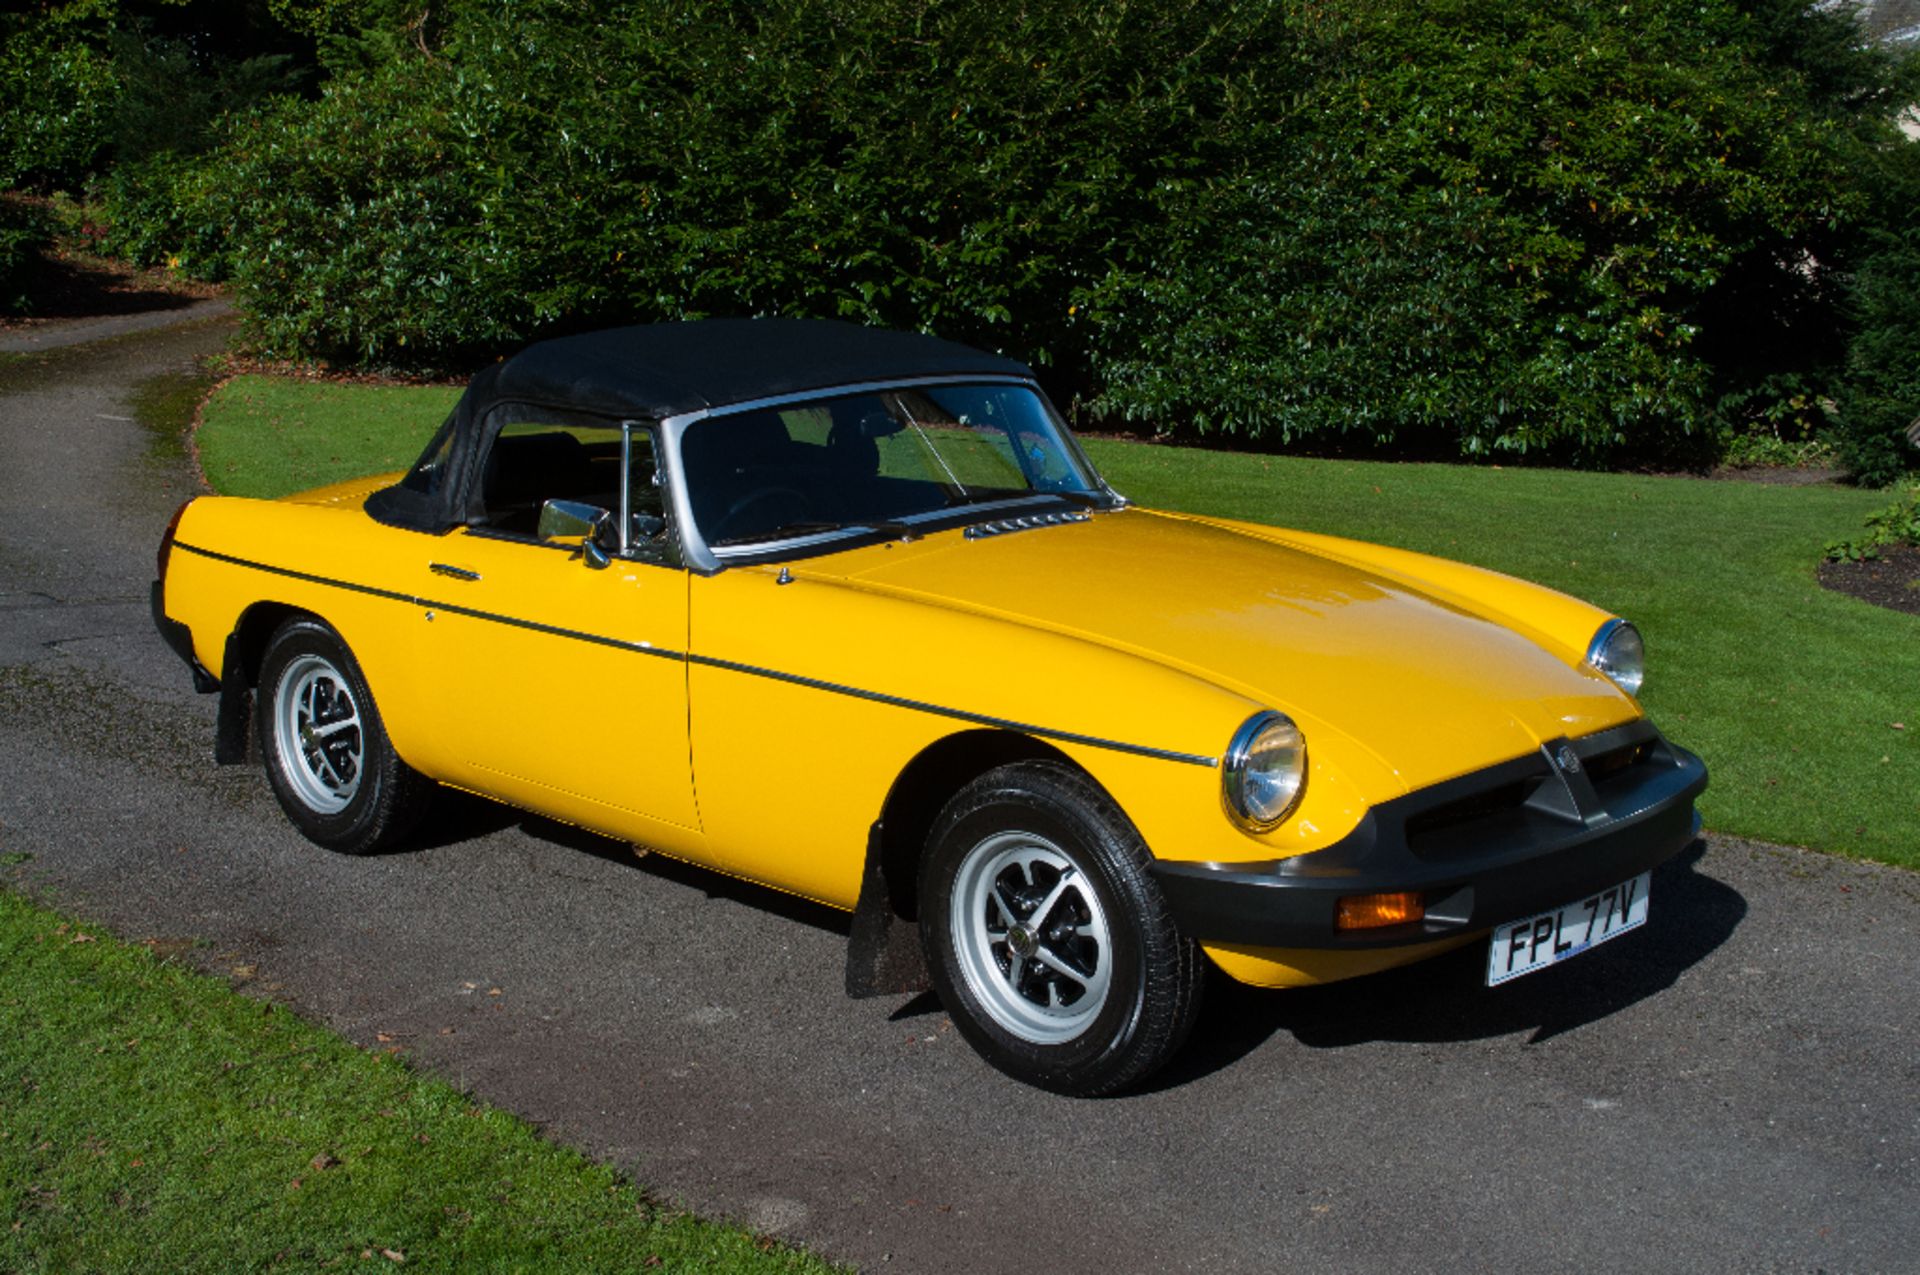 A 1980 MG B roadster, registration number FPL 77V, yellow.